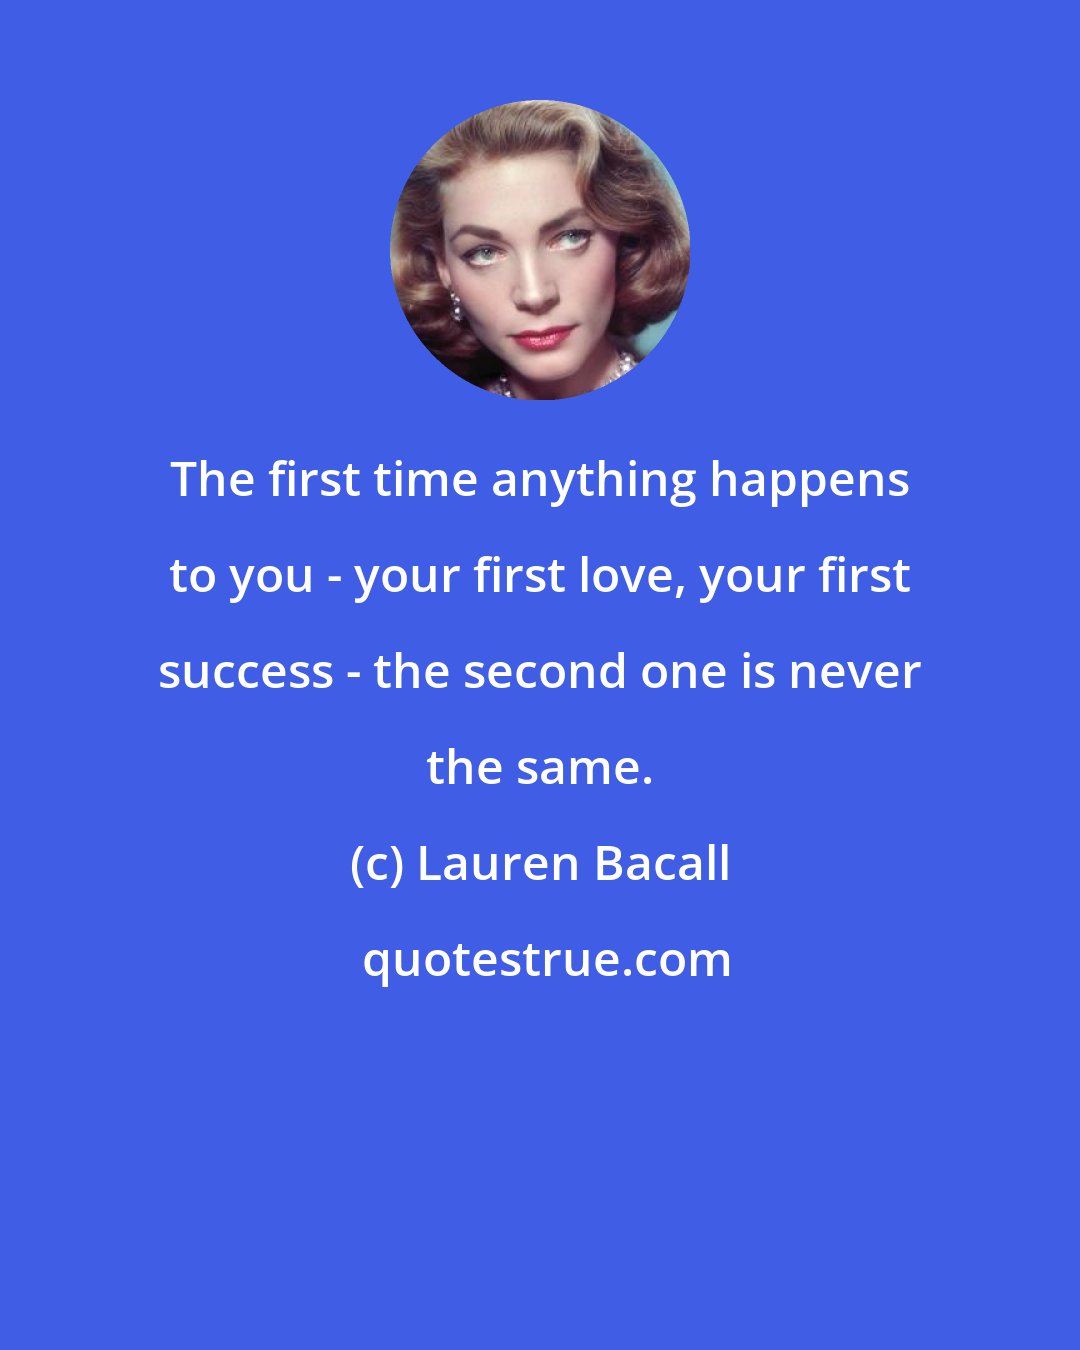 Lauren Bacall: The first time anything happens to you - your first love, your first success - the second one is never the same.